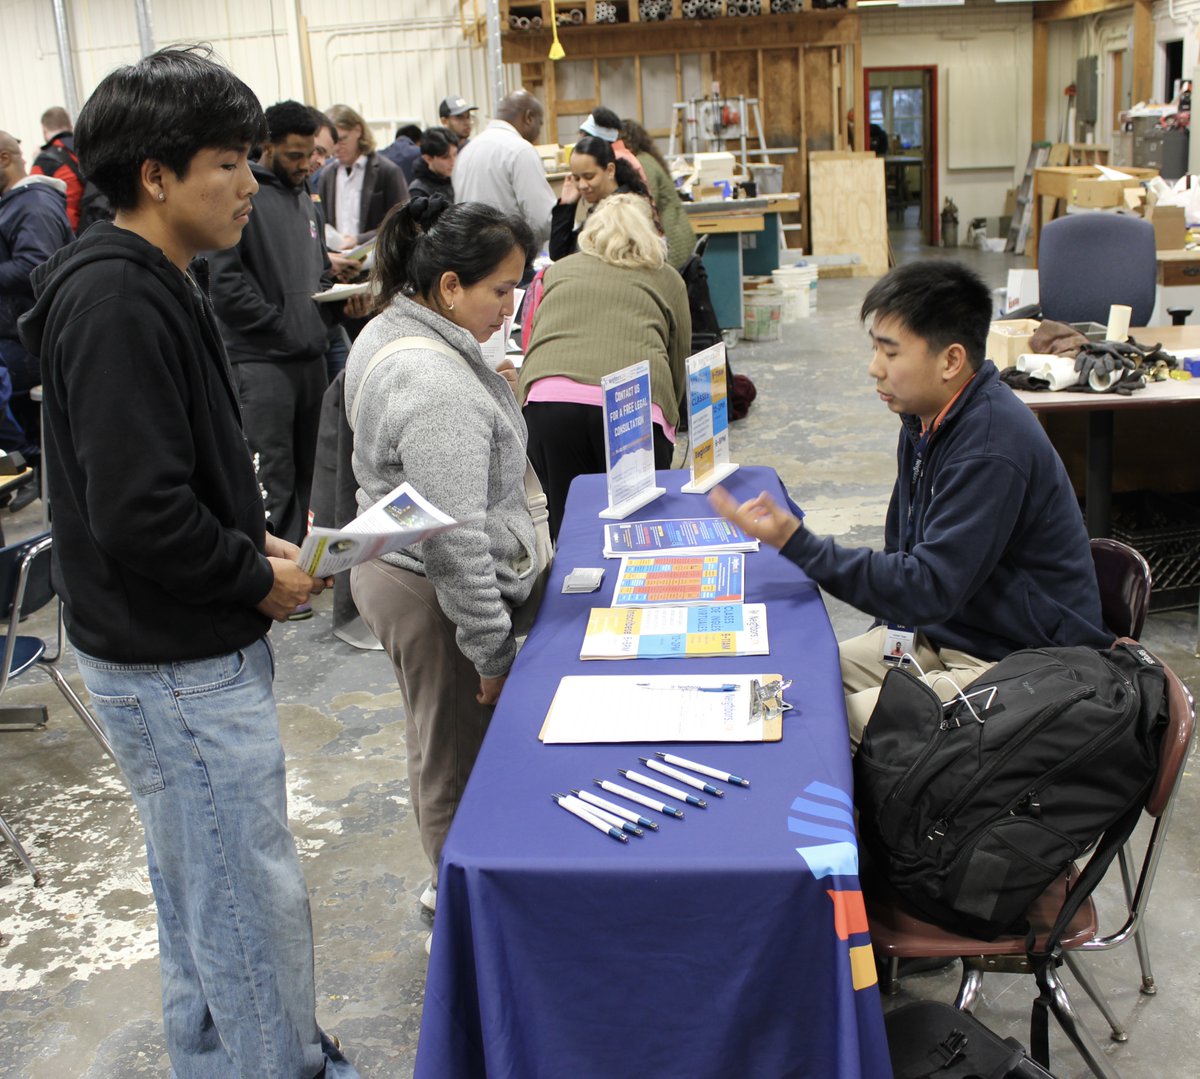 The Spring Connections Open House hosted by the @SWBOCES Center for Adult & Community Services on April 10, highlighted opportunities for more than 100 job seekers and brought them together with employers and industry experts. adulted.swboces.org/groups/84219/n…